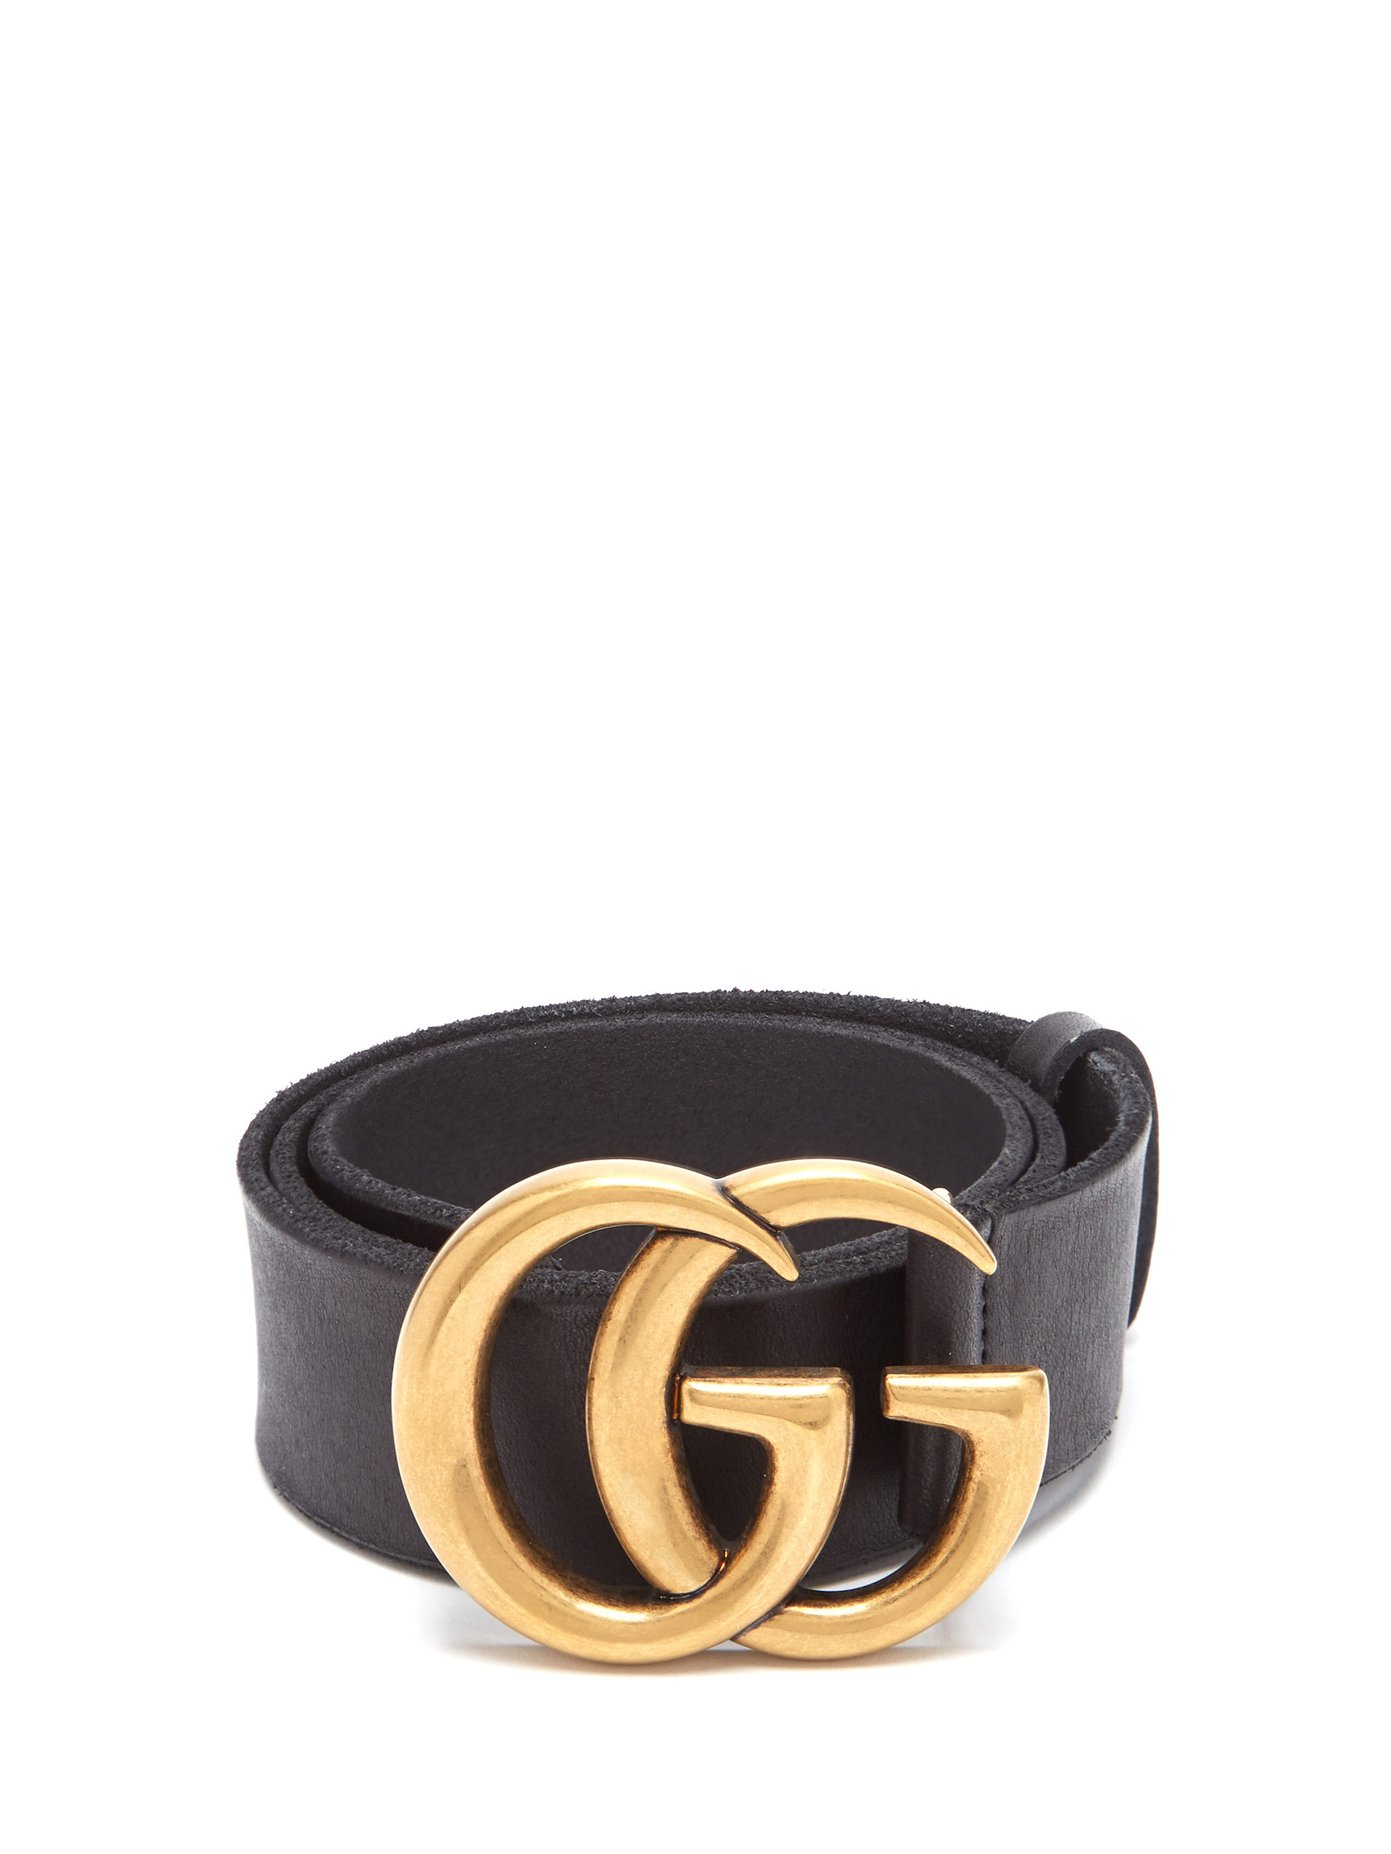 how much us a gucci belt